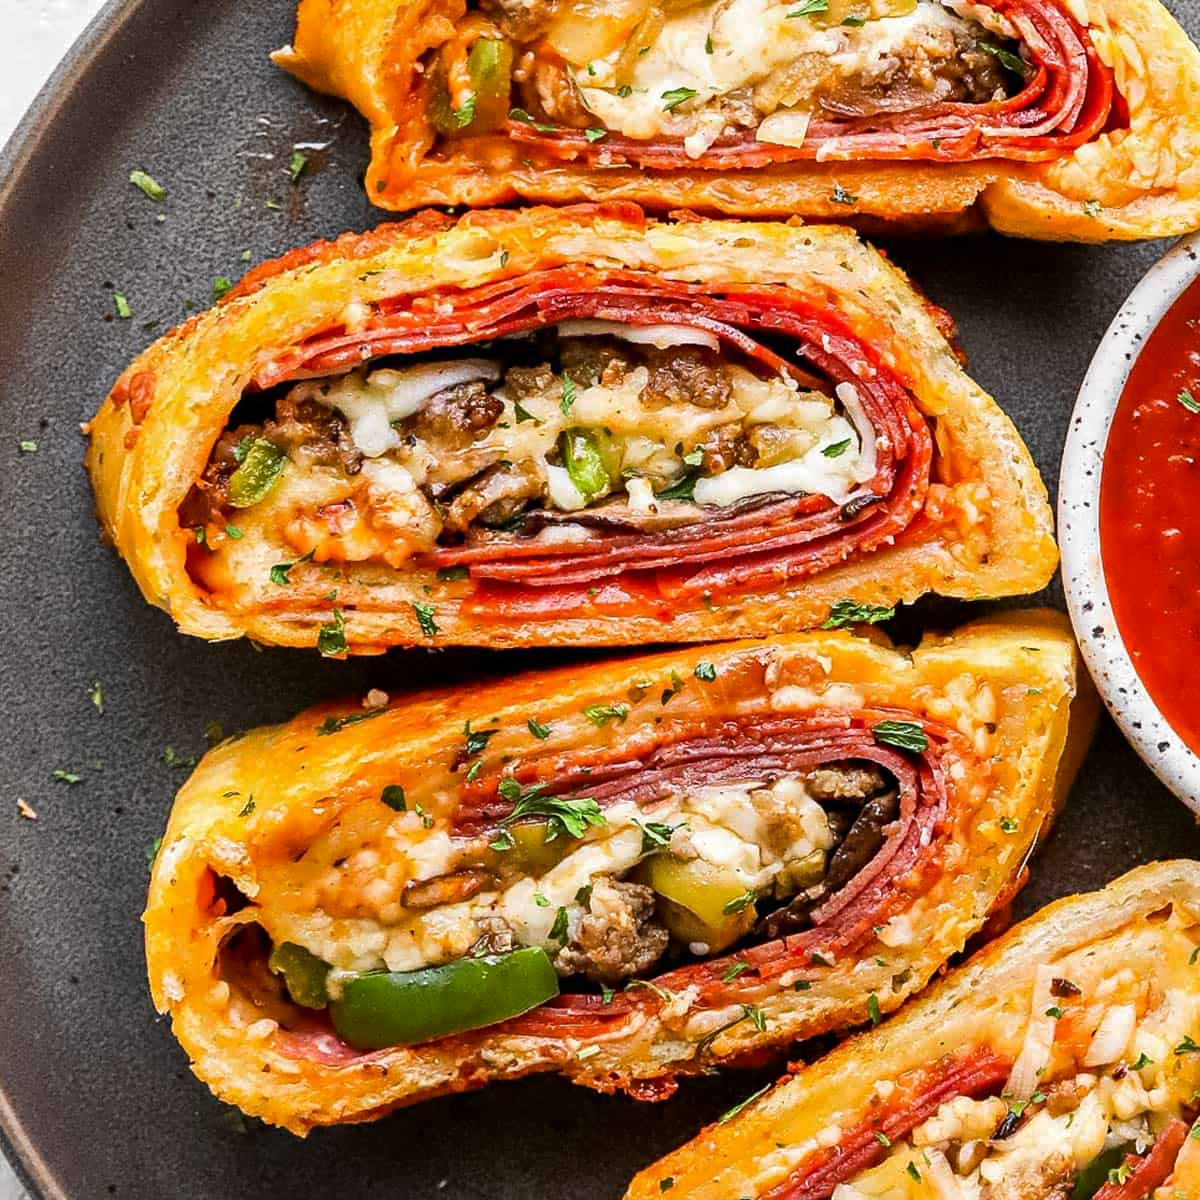 https://brooklyncraftpizza.com/blog/what-to-make-with-pizza-dough/